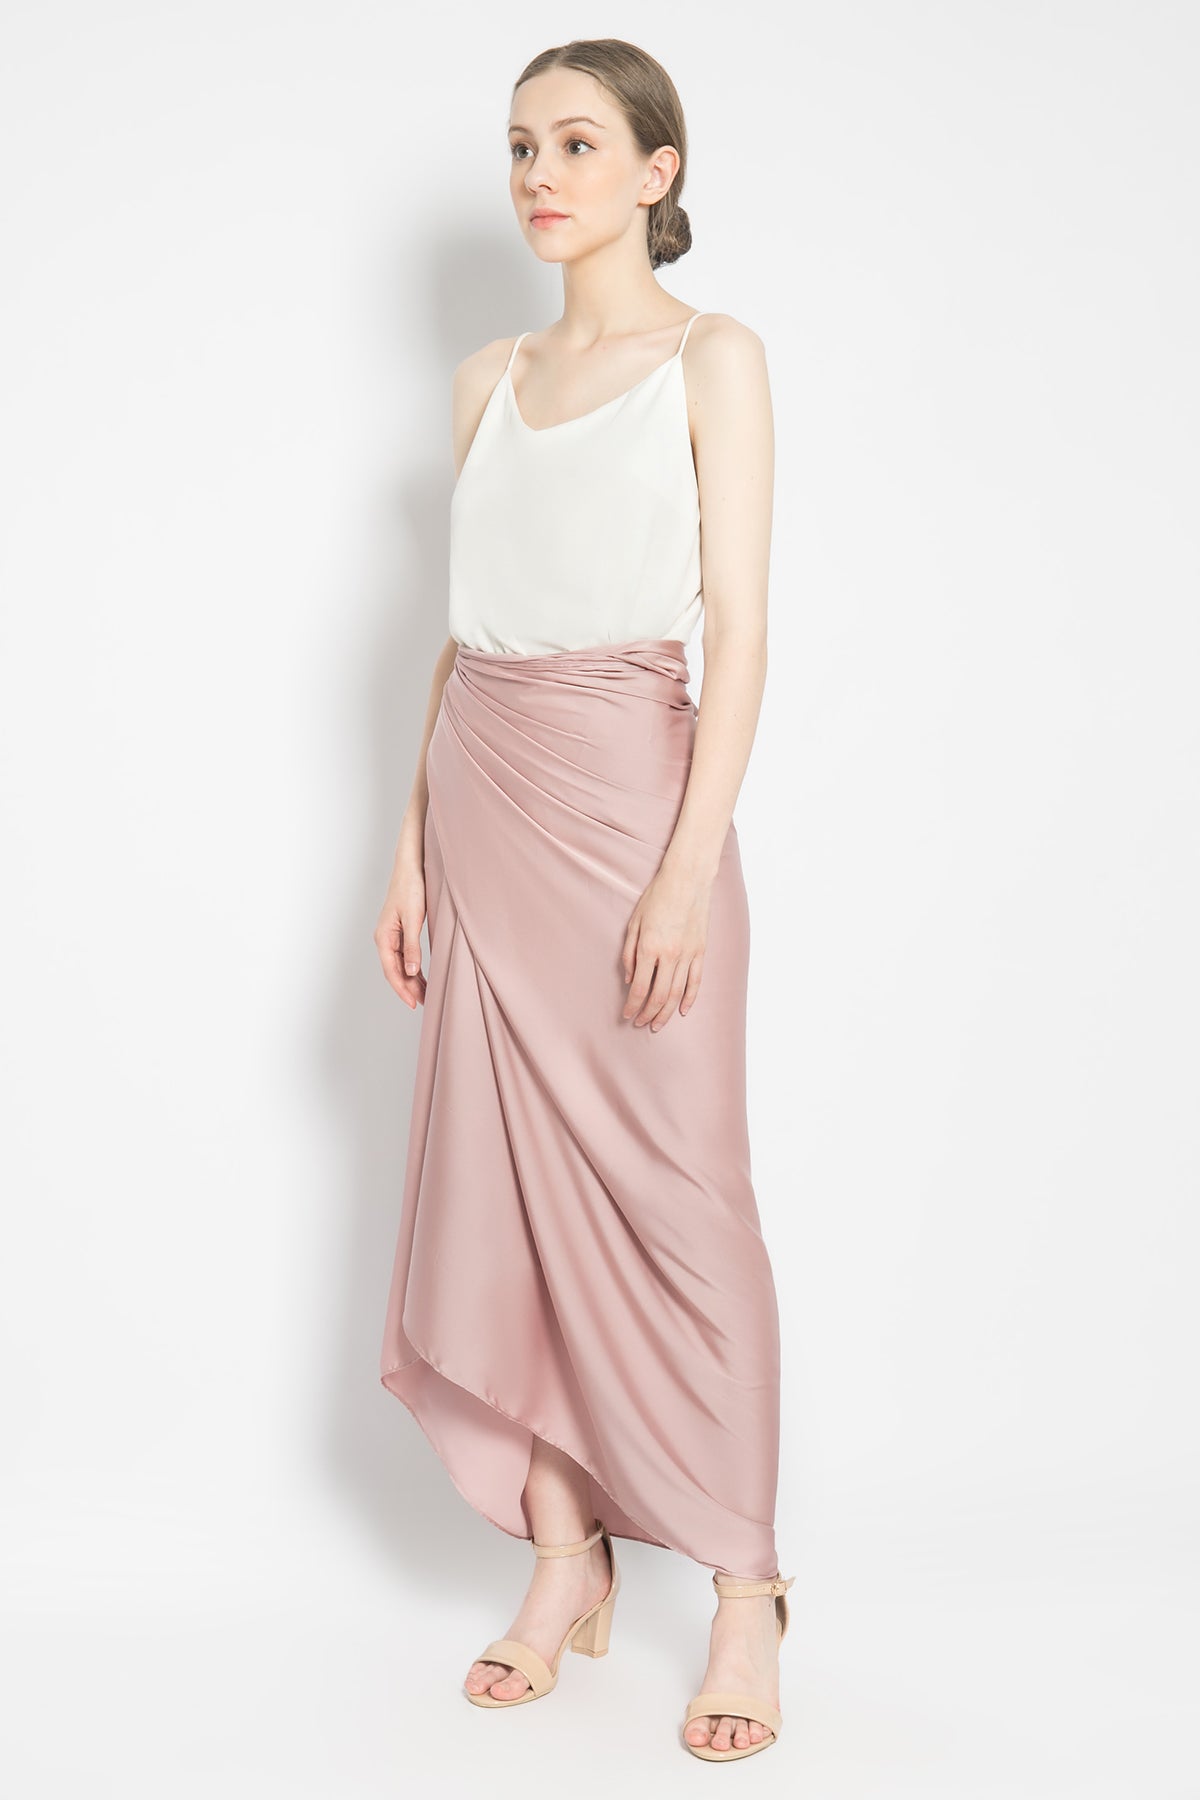 Aisyah Lilit Skirt in Pink